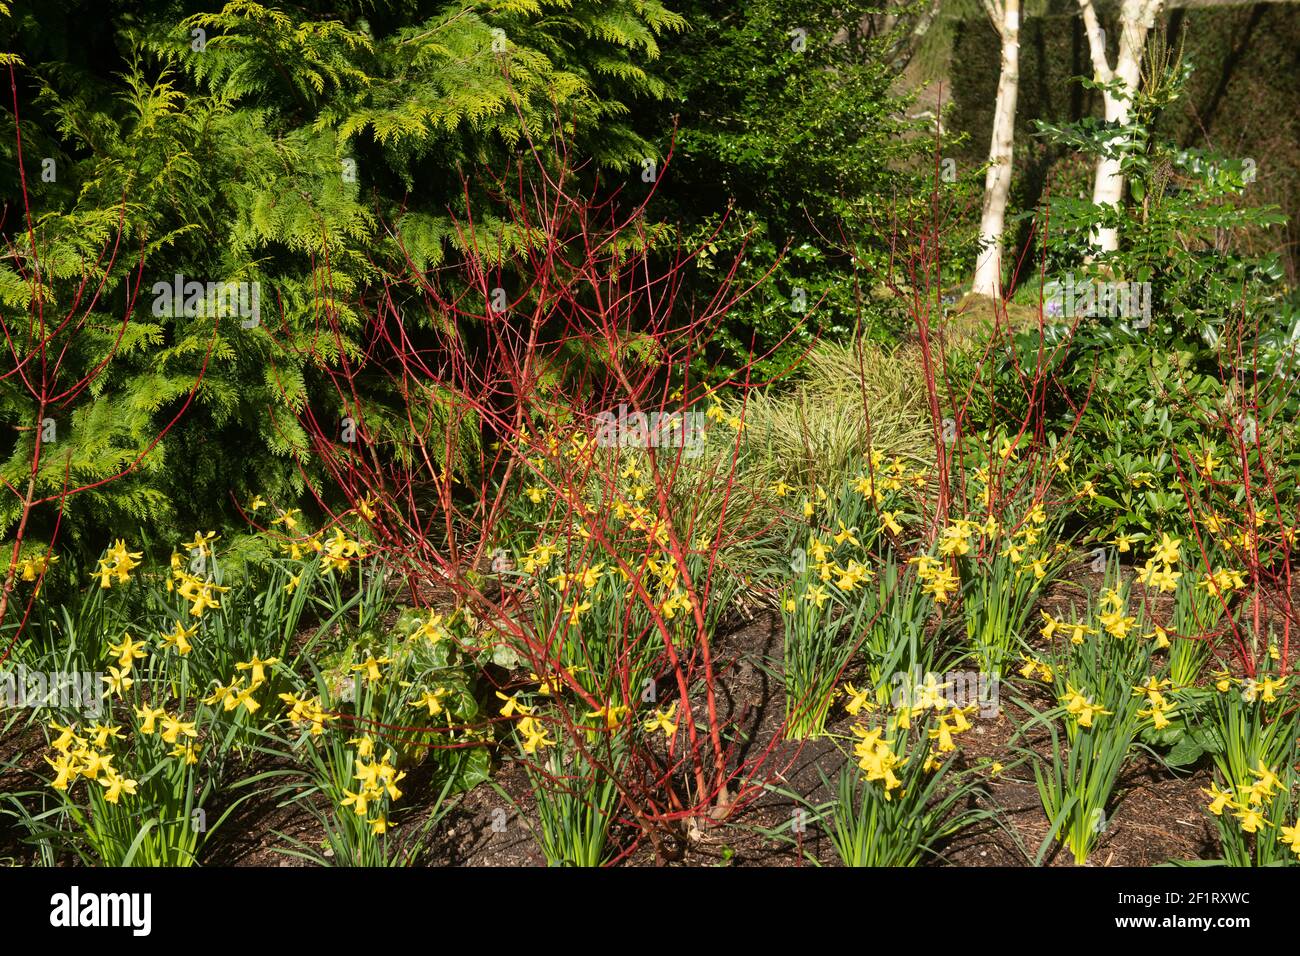 Bright Red Winter Stems on a Deciduous Dogwood Shrub (Cornus alba 'Baton Rouge') Surrounded by Yellow Daffodils (Narcissus 'February Gold') Stock Photo